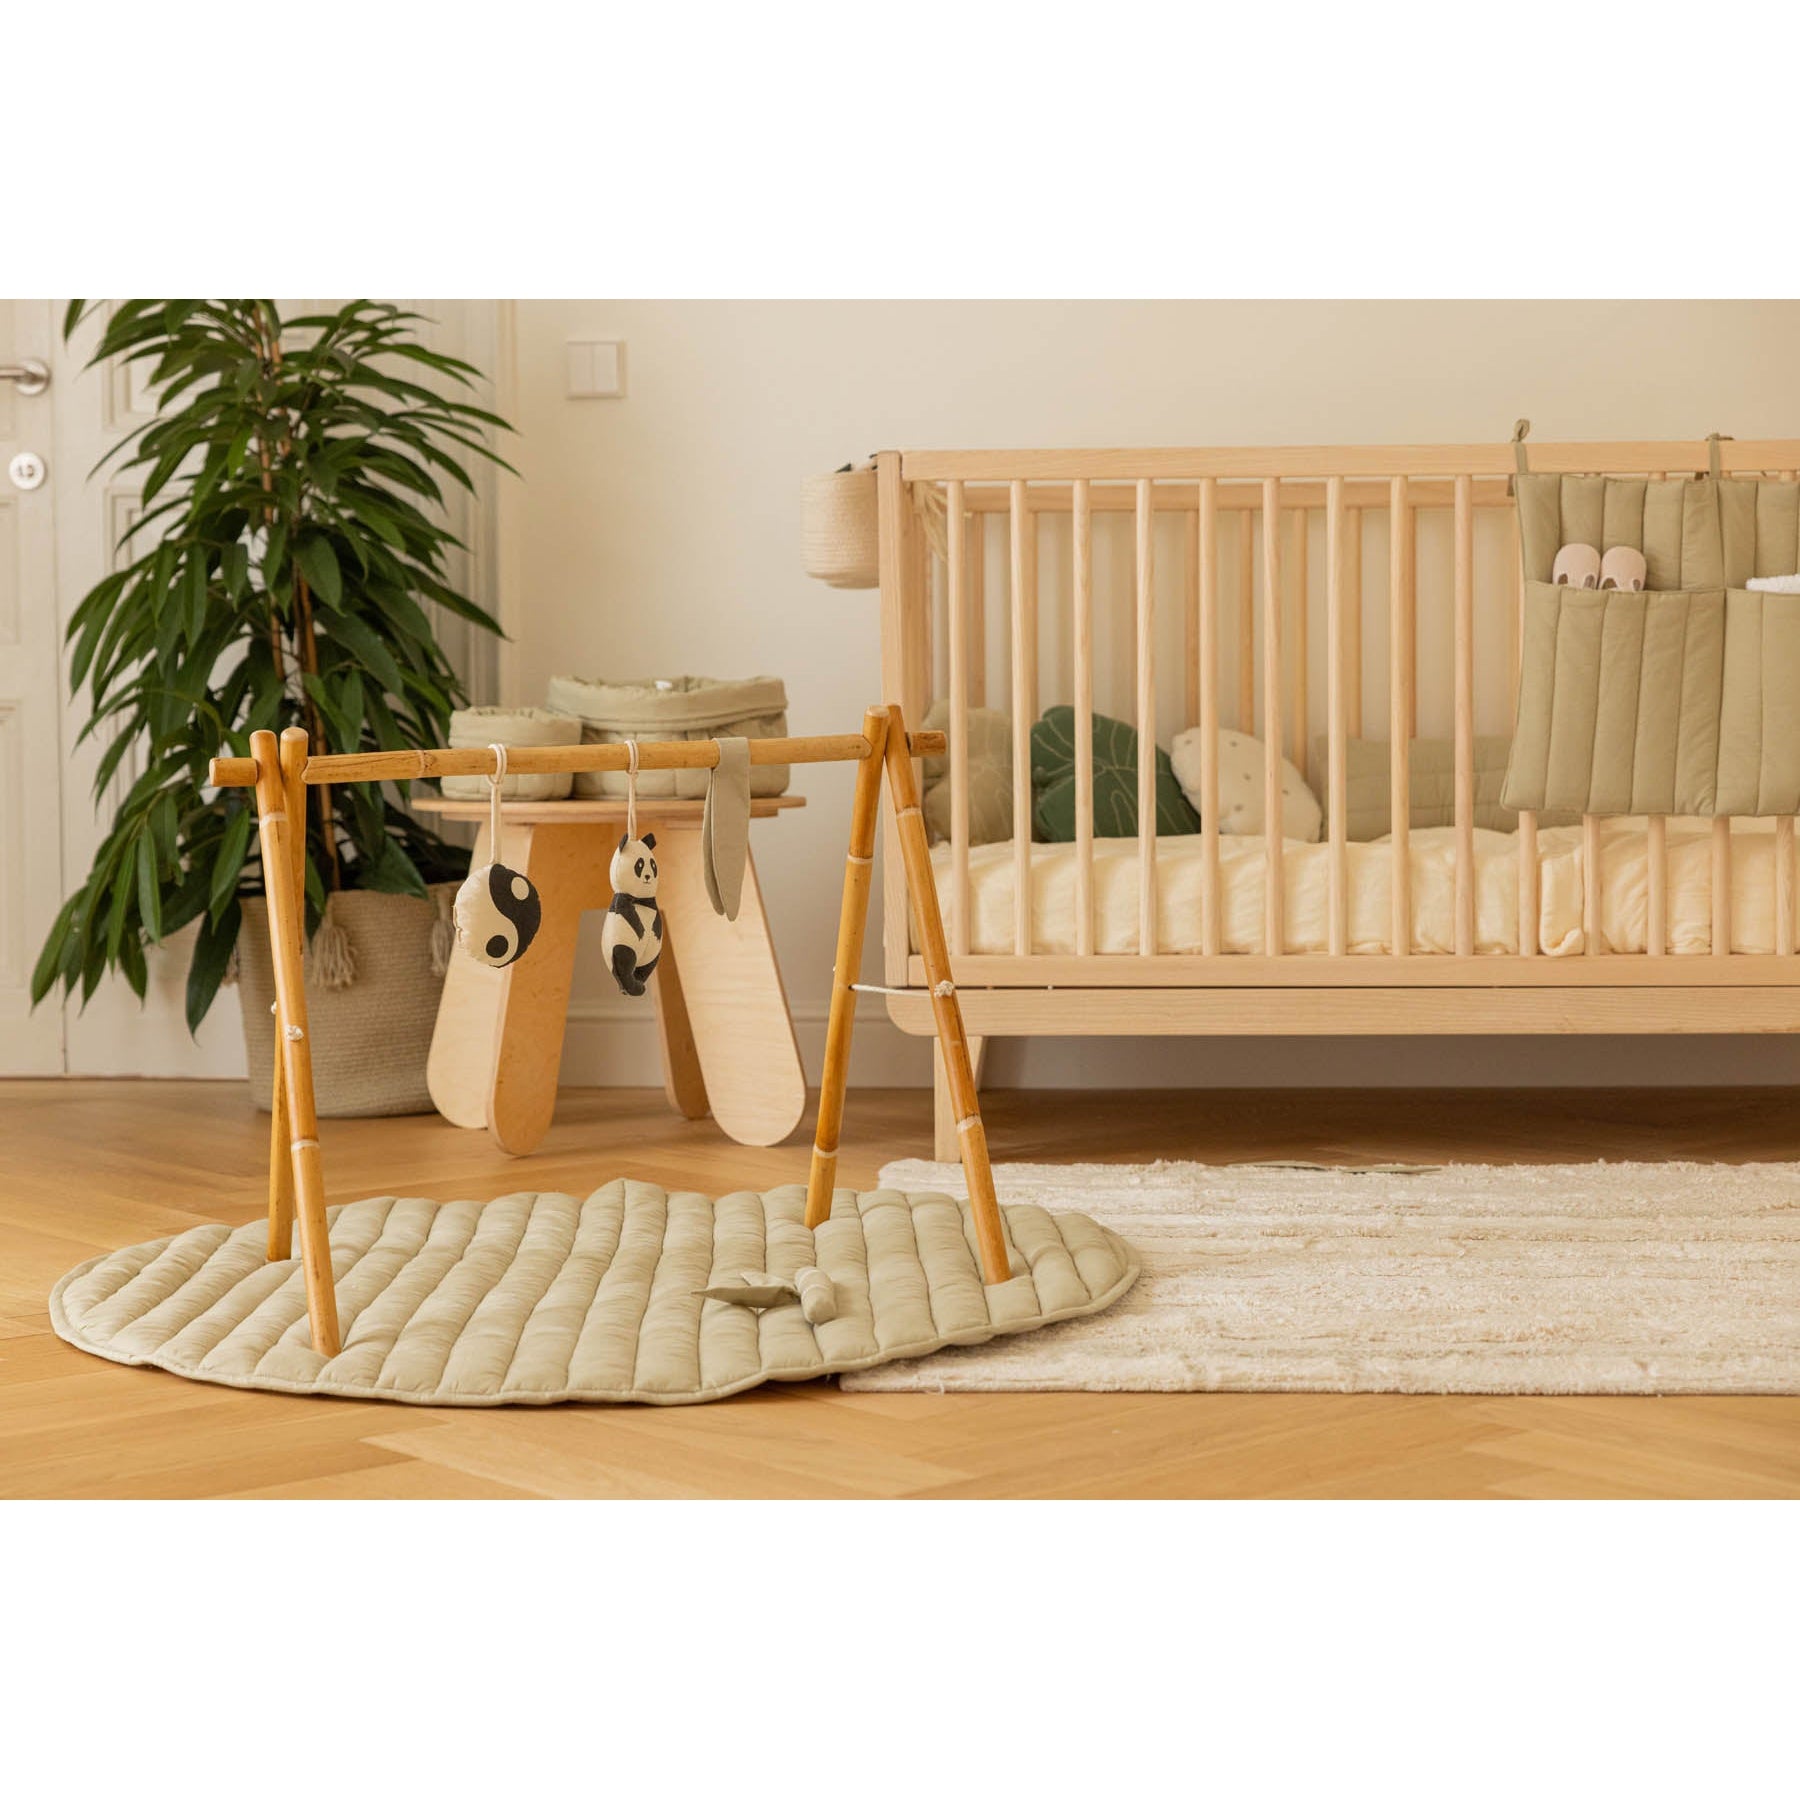 Lorena Canals Bamboo Leaf Playmat at Rugs by Roo